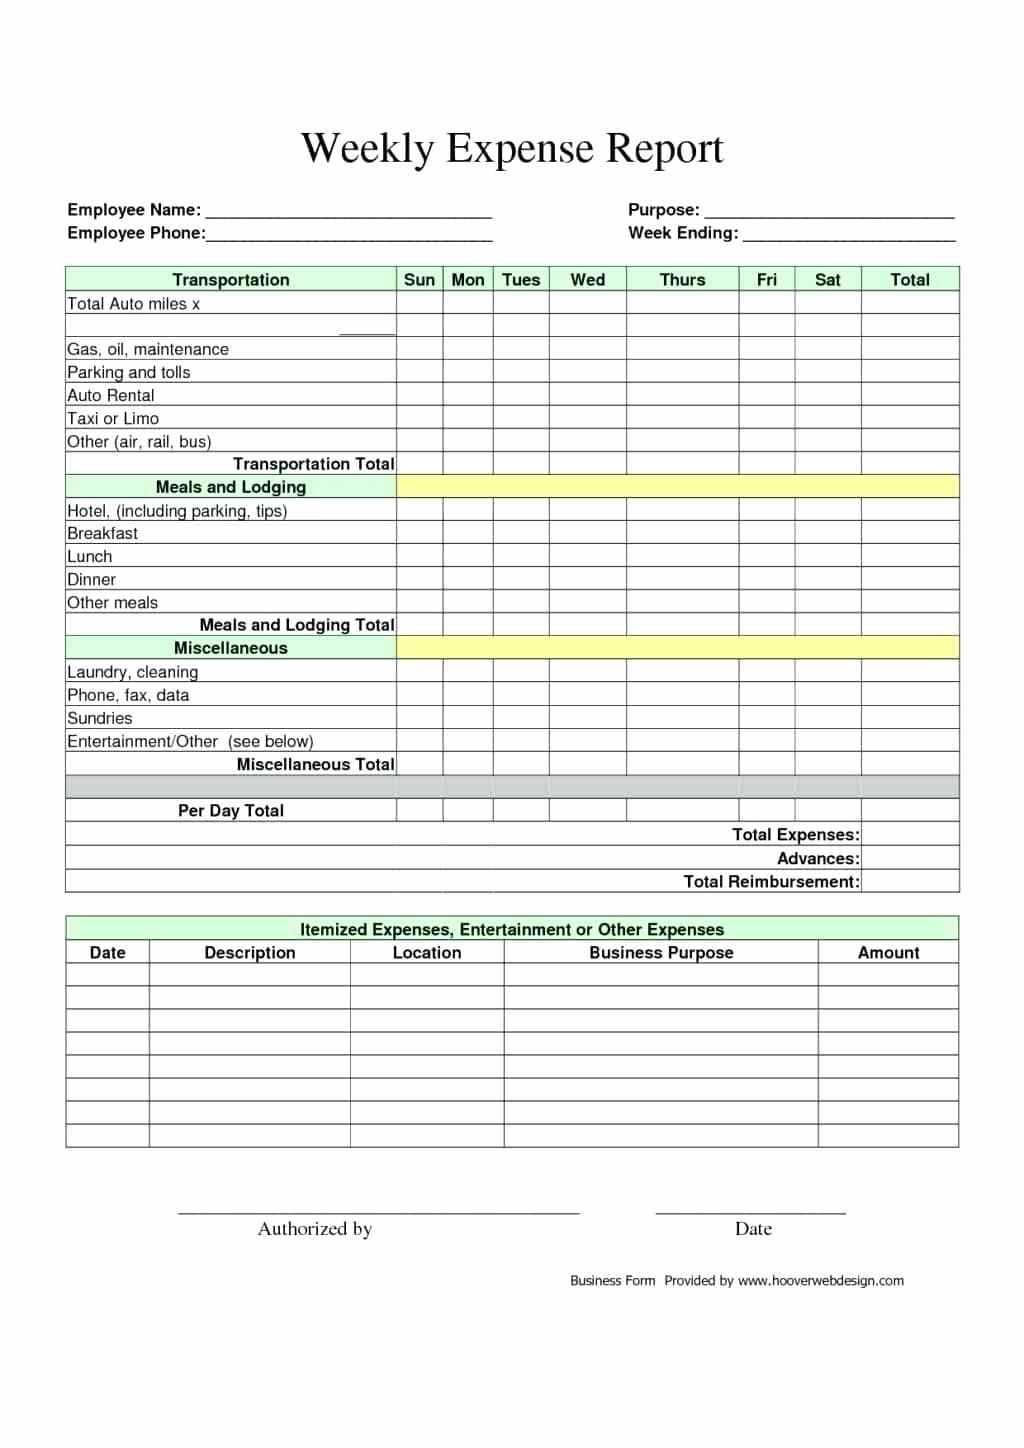 024 Word Expense Report Template Ideas Event Mileage Free In Gas Mileage Expense Report Template